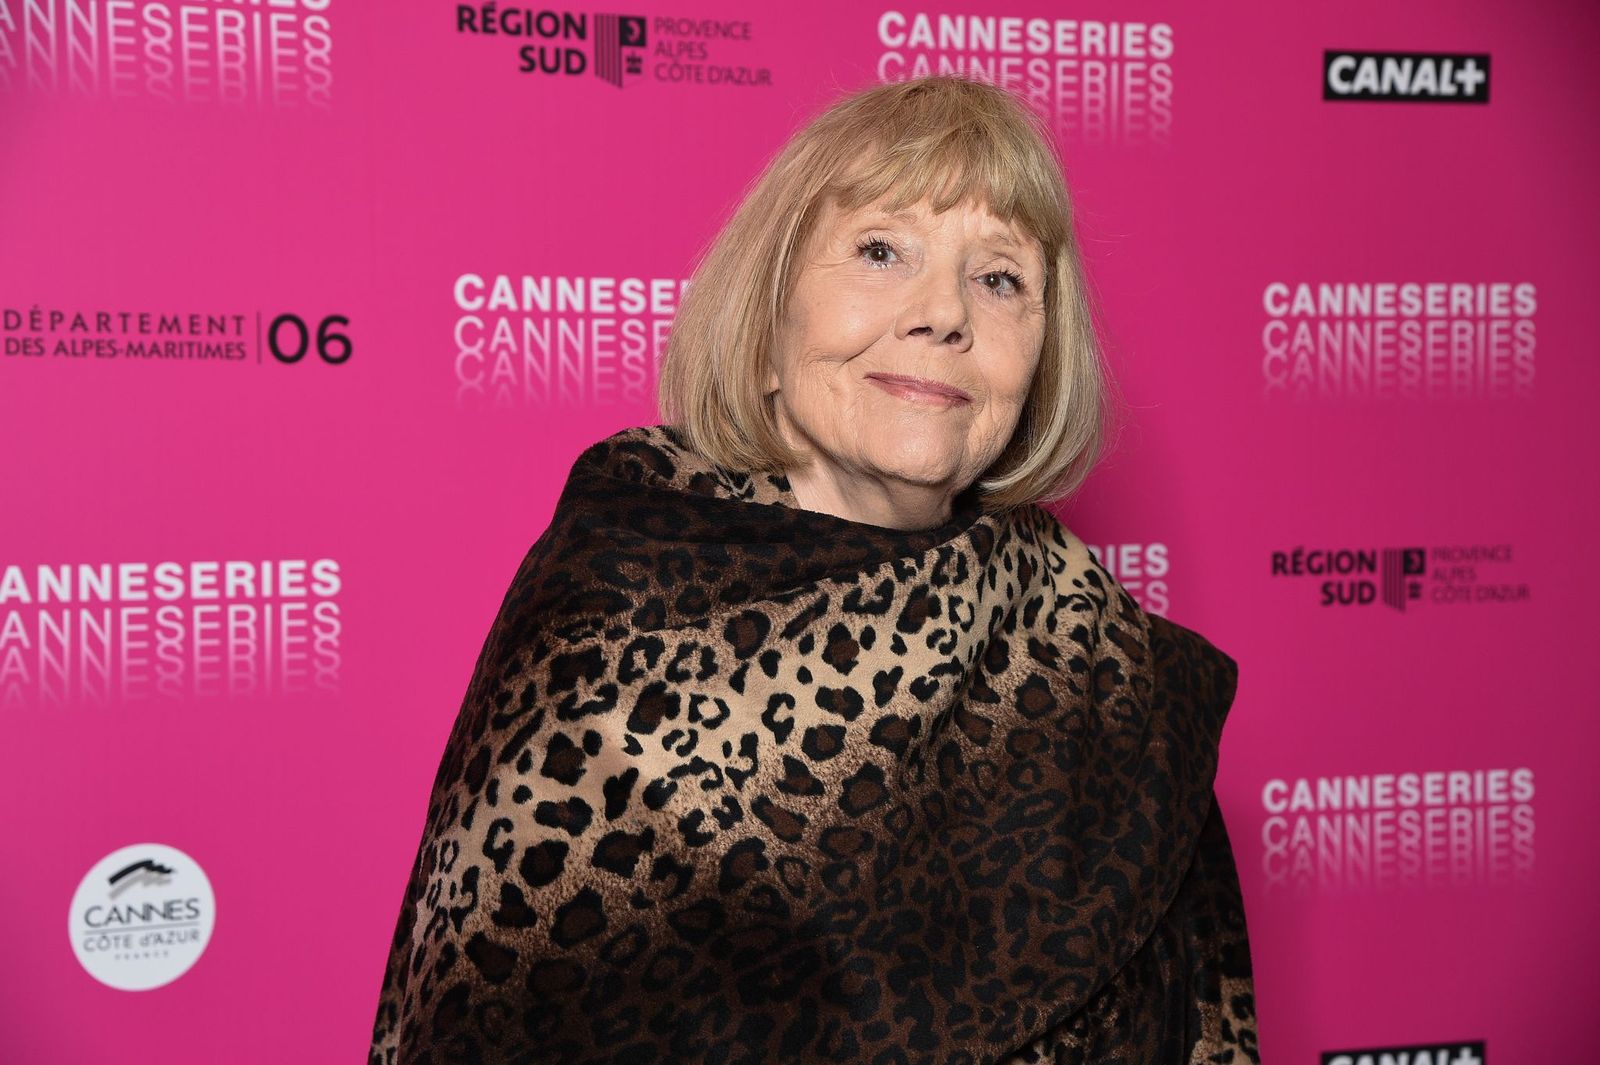 Diana Rigg le 06 avril 2019 à Cannes, France. | Photo : Getty Images